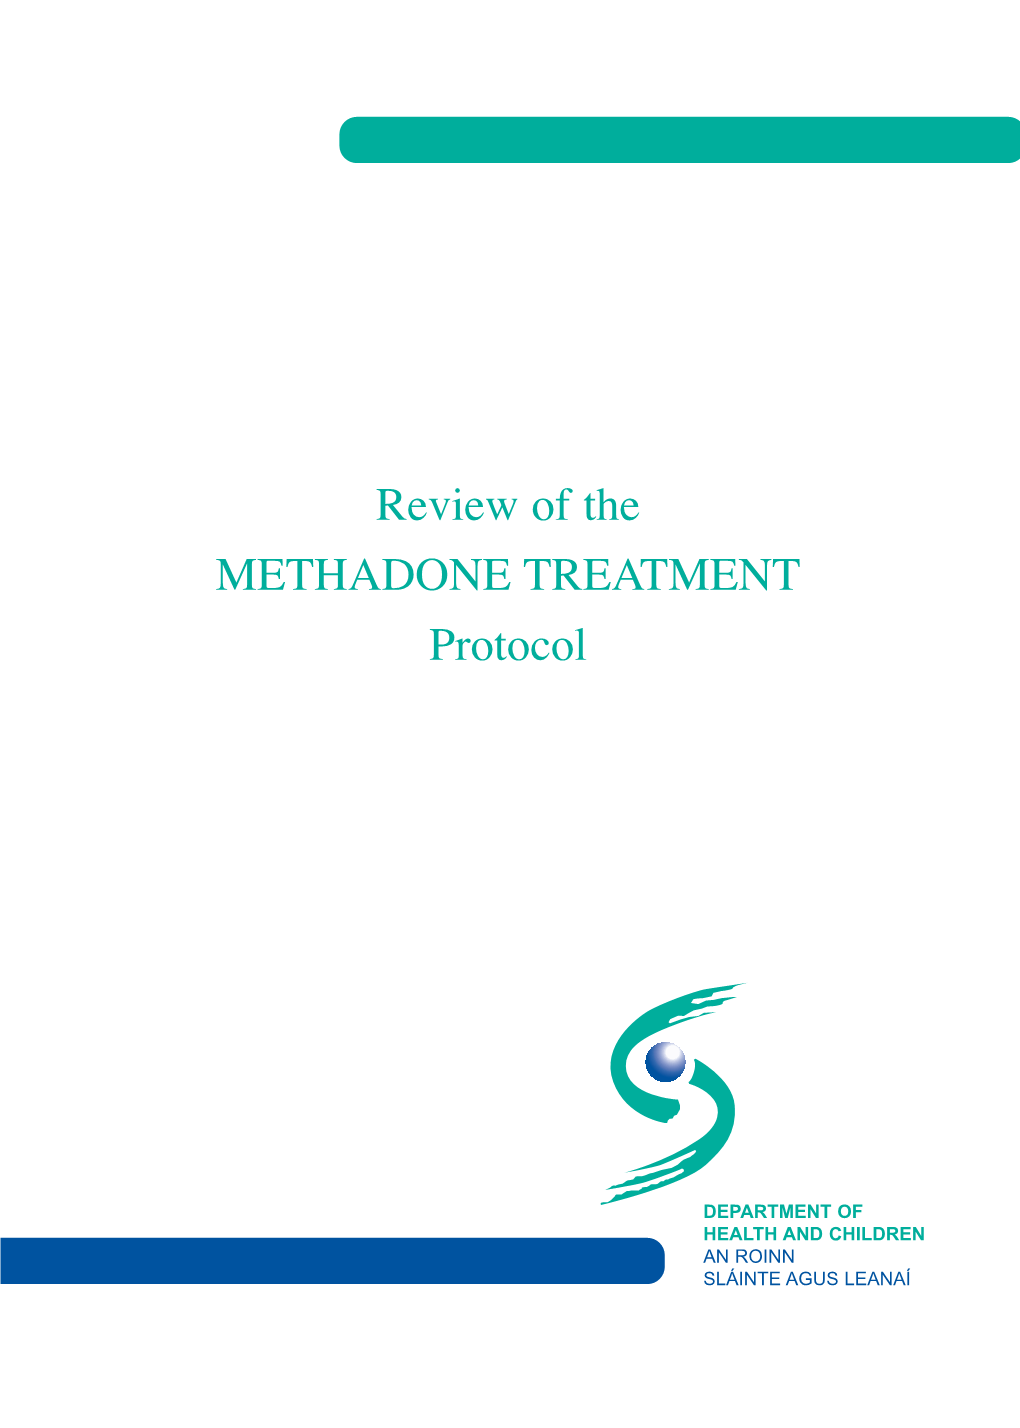 Review of the METHADONE TREATMENT Protocol